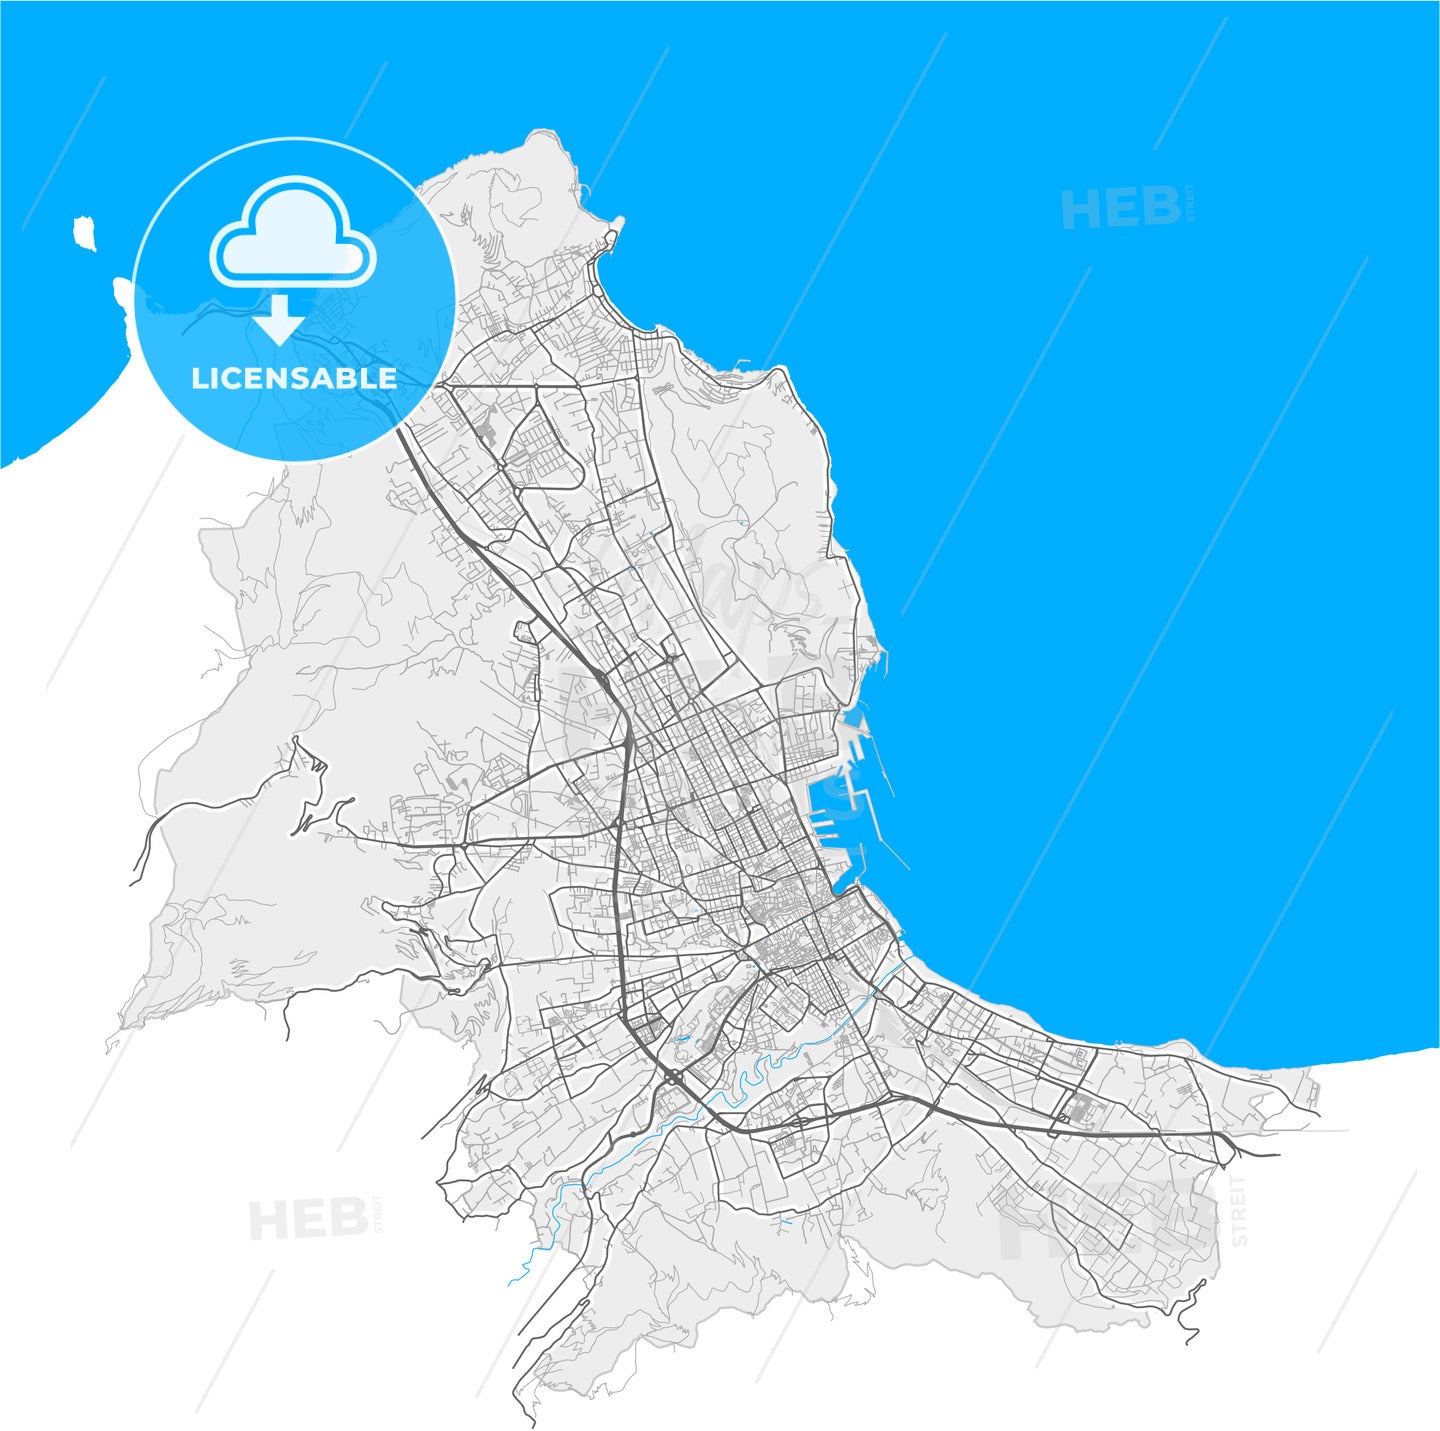 Palermo, Sicily, Italy, high quality vector map